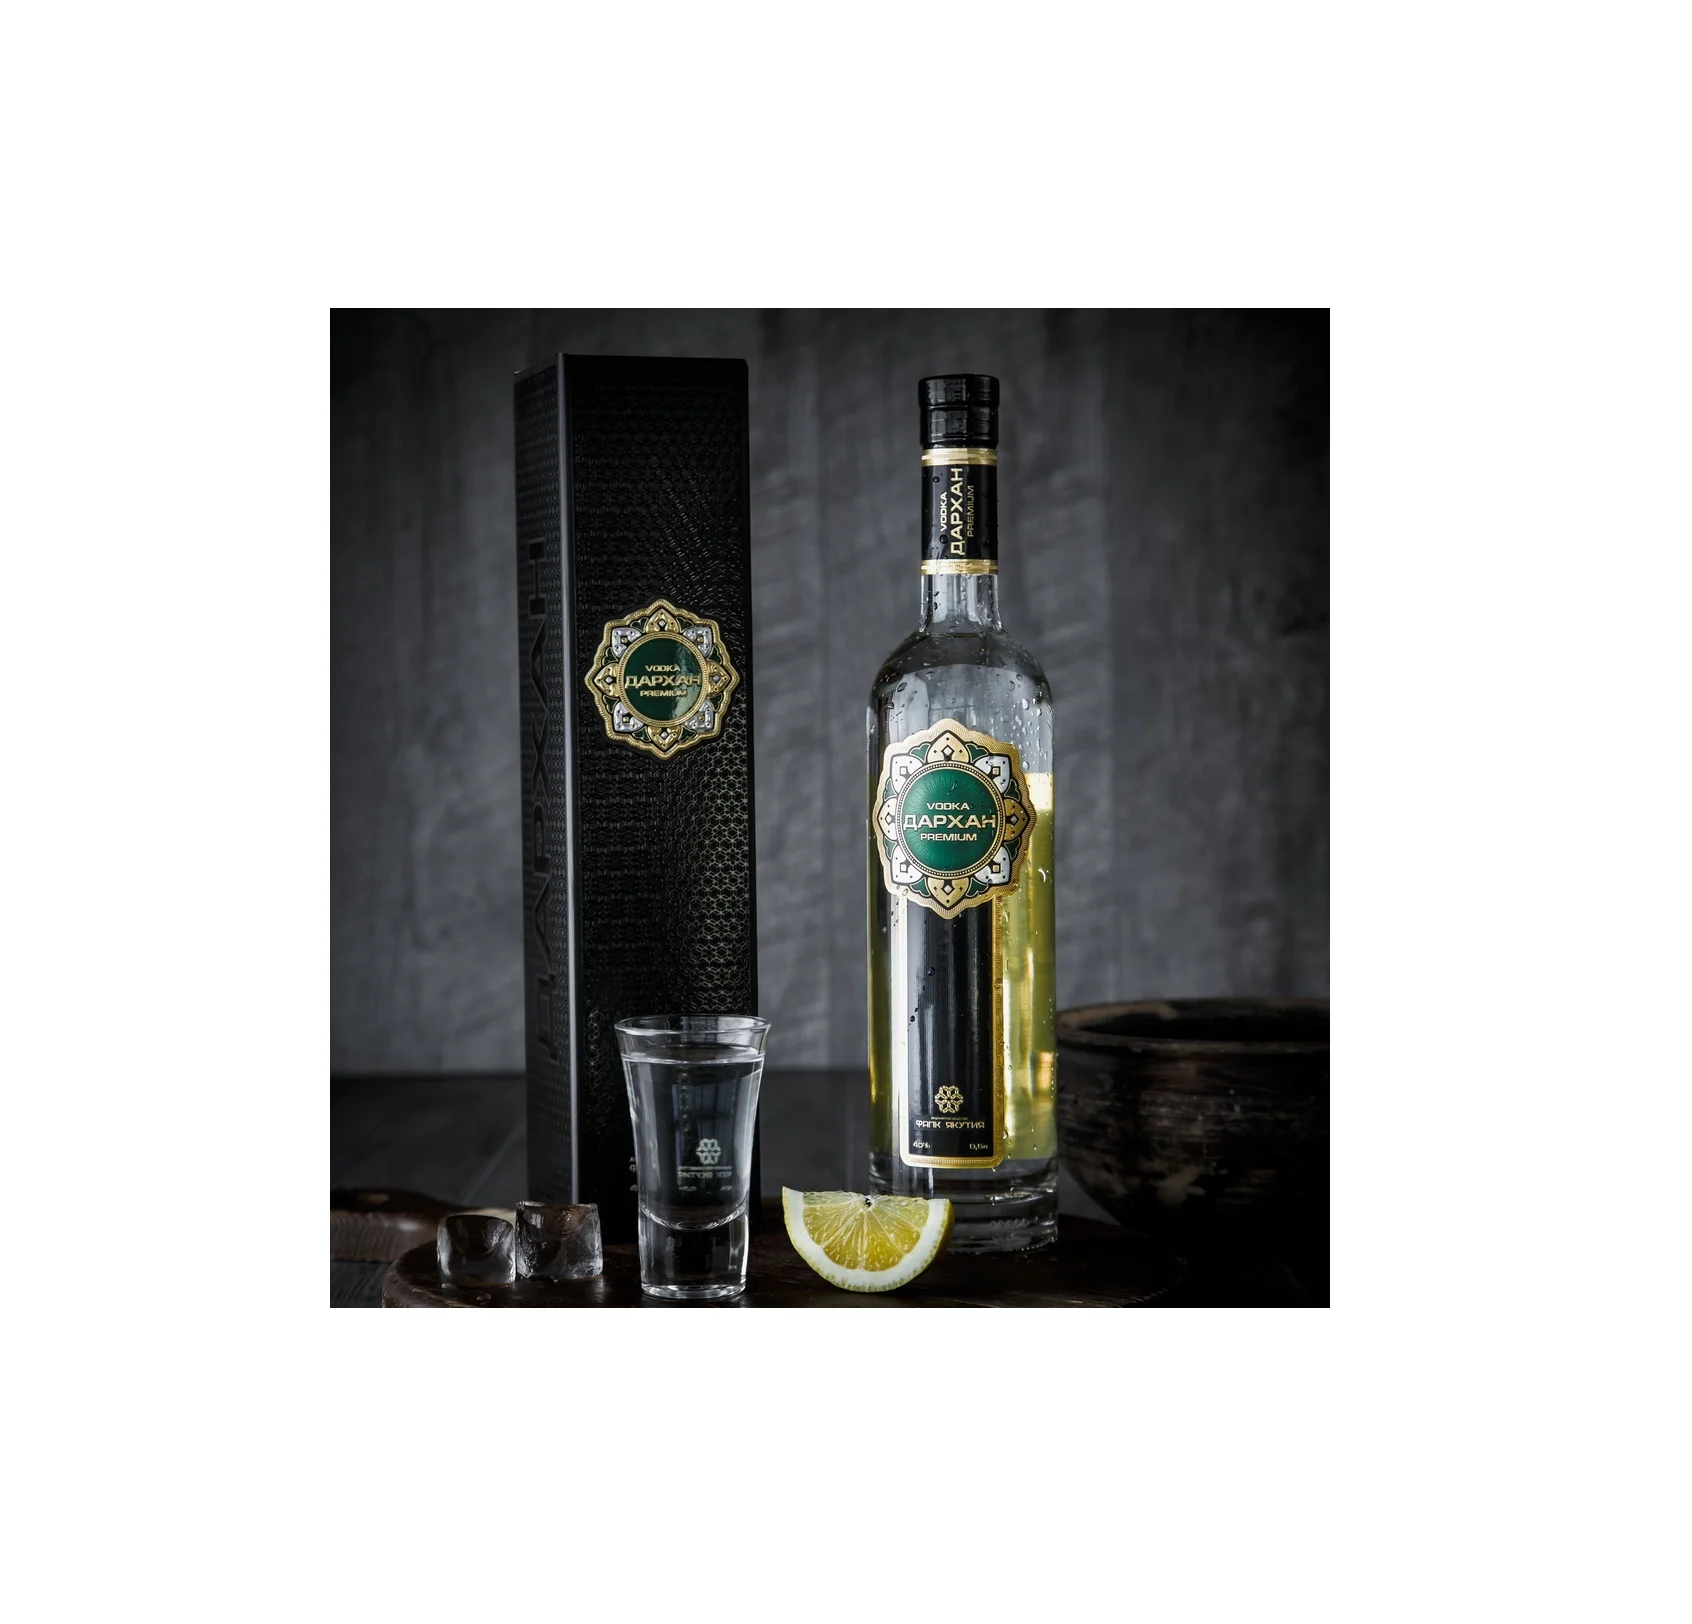 40% Strong Natural Ecological Raw Materials Unique Product Alcohol Premium Quality Darhan Vodka